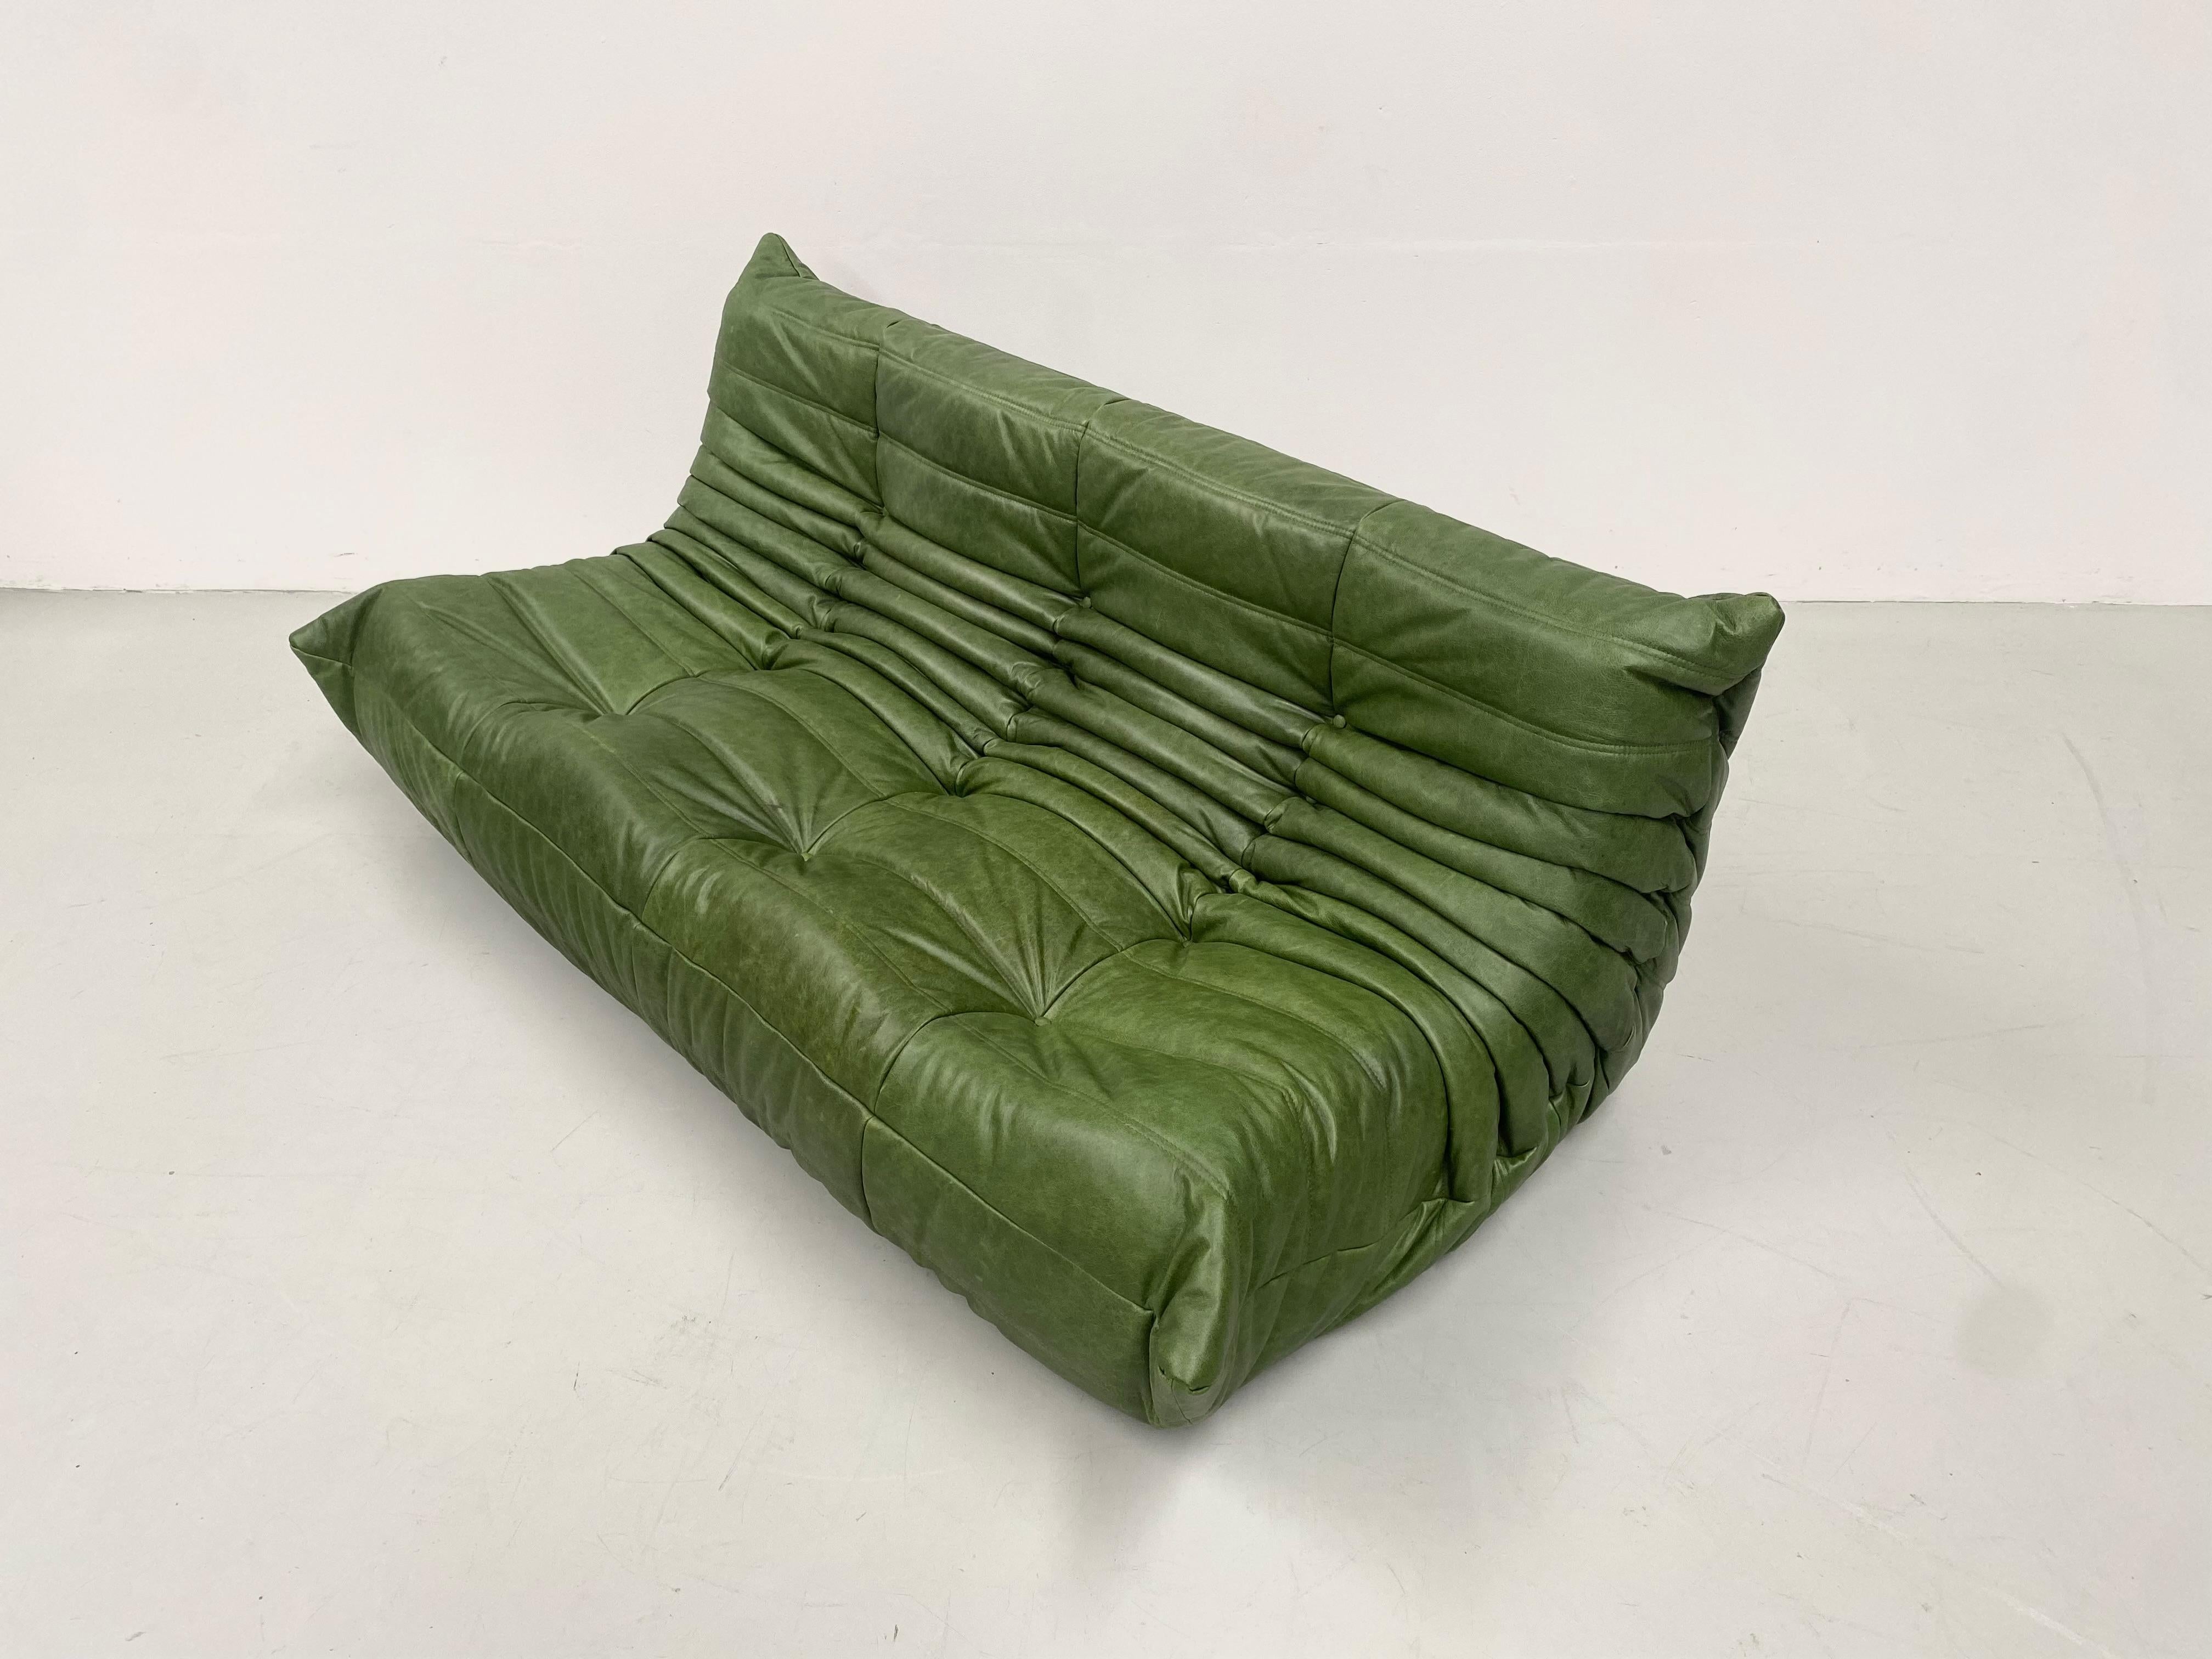 French  Togo Sofa in Green  Leather by Michel Ducaroy for Ligne Roset. For Sale 5